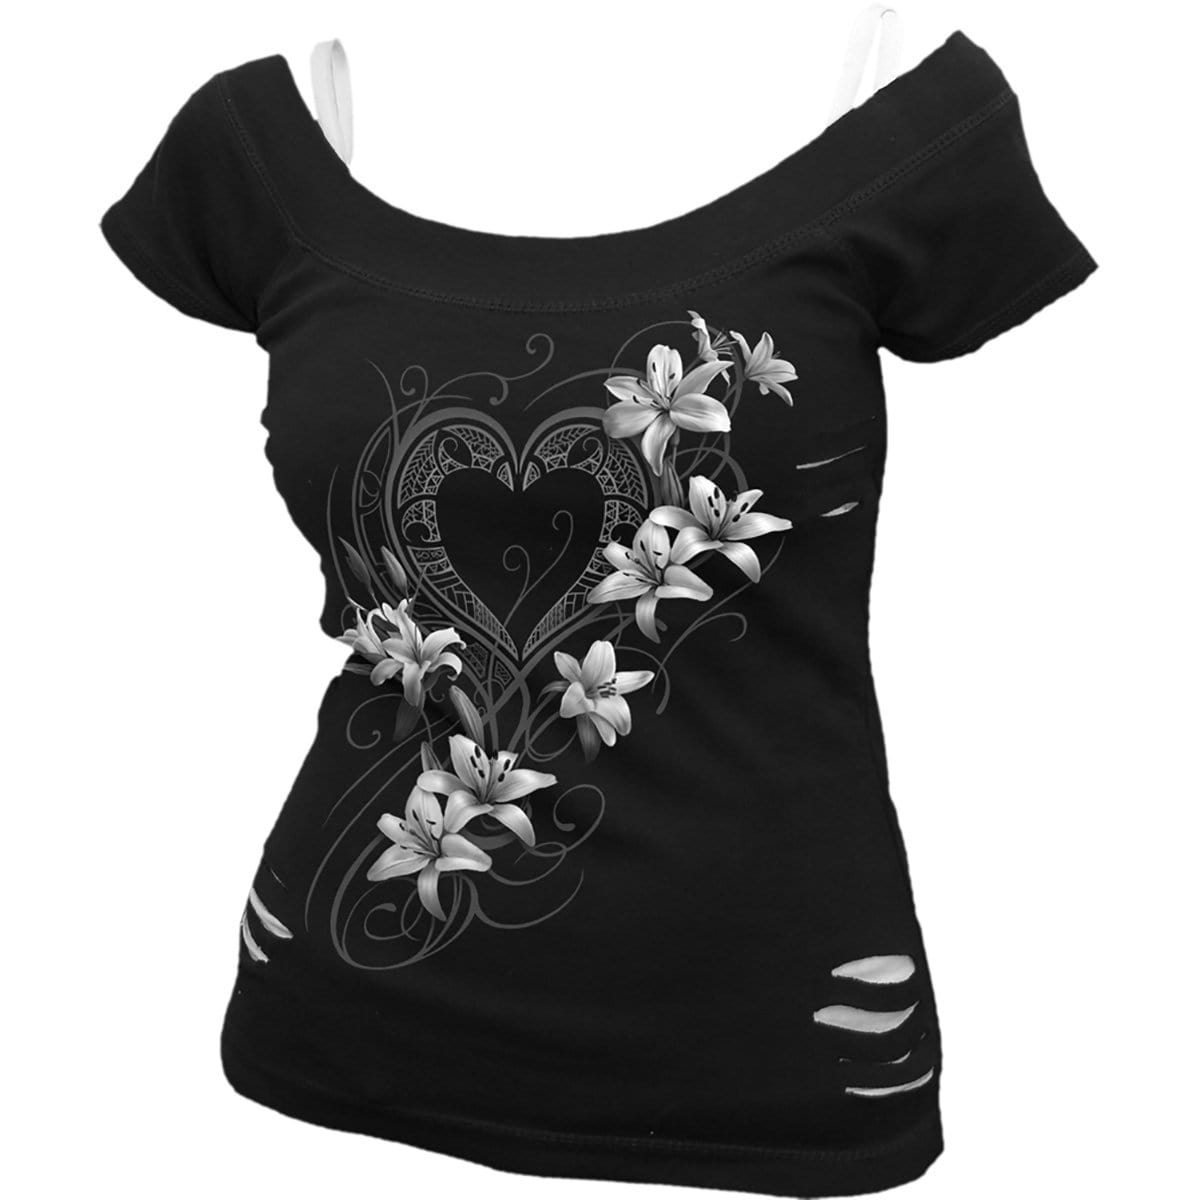 PURE OF HEART - 2in1 White Ripped Top Black - Spiral USA